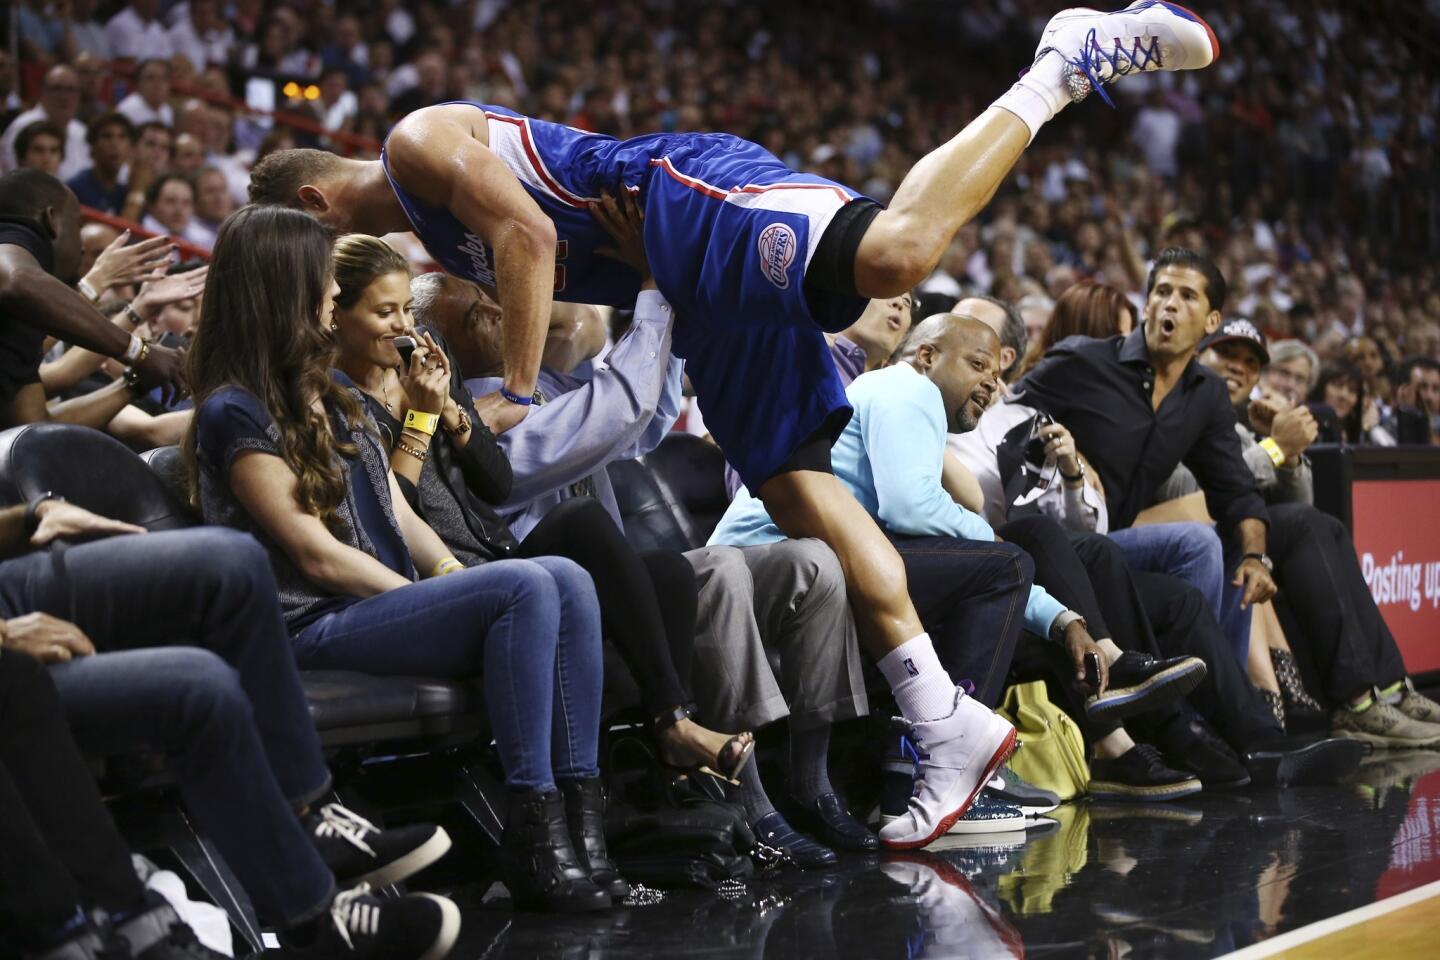 Clippers power forward Blake Griffin lands in the front row while chasing down a loose ball in the second half Thursday night in Miami.